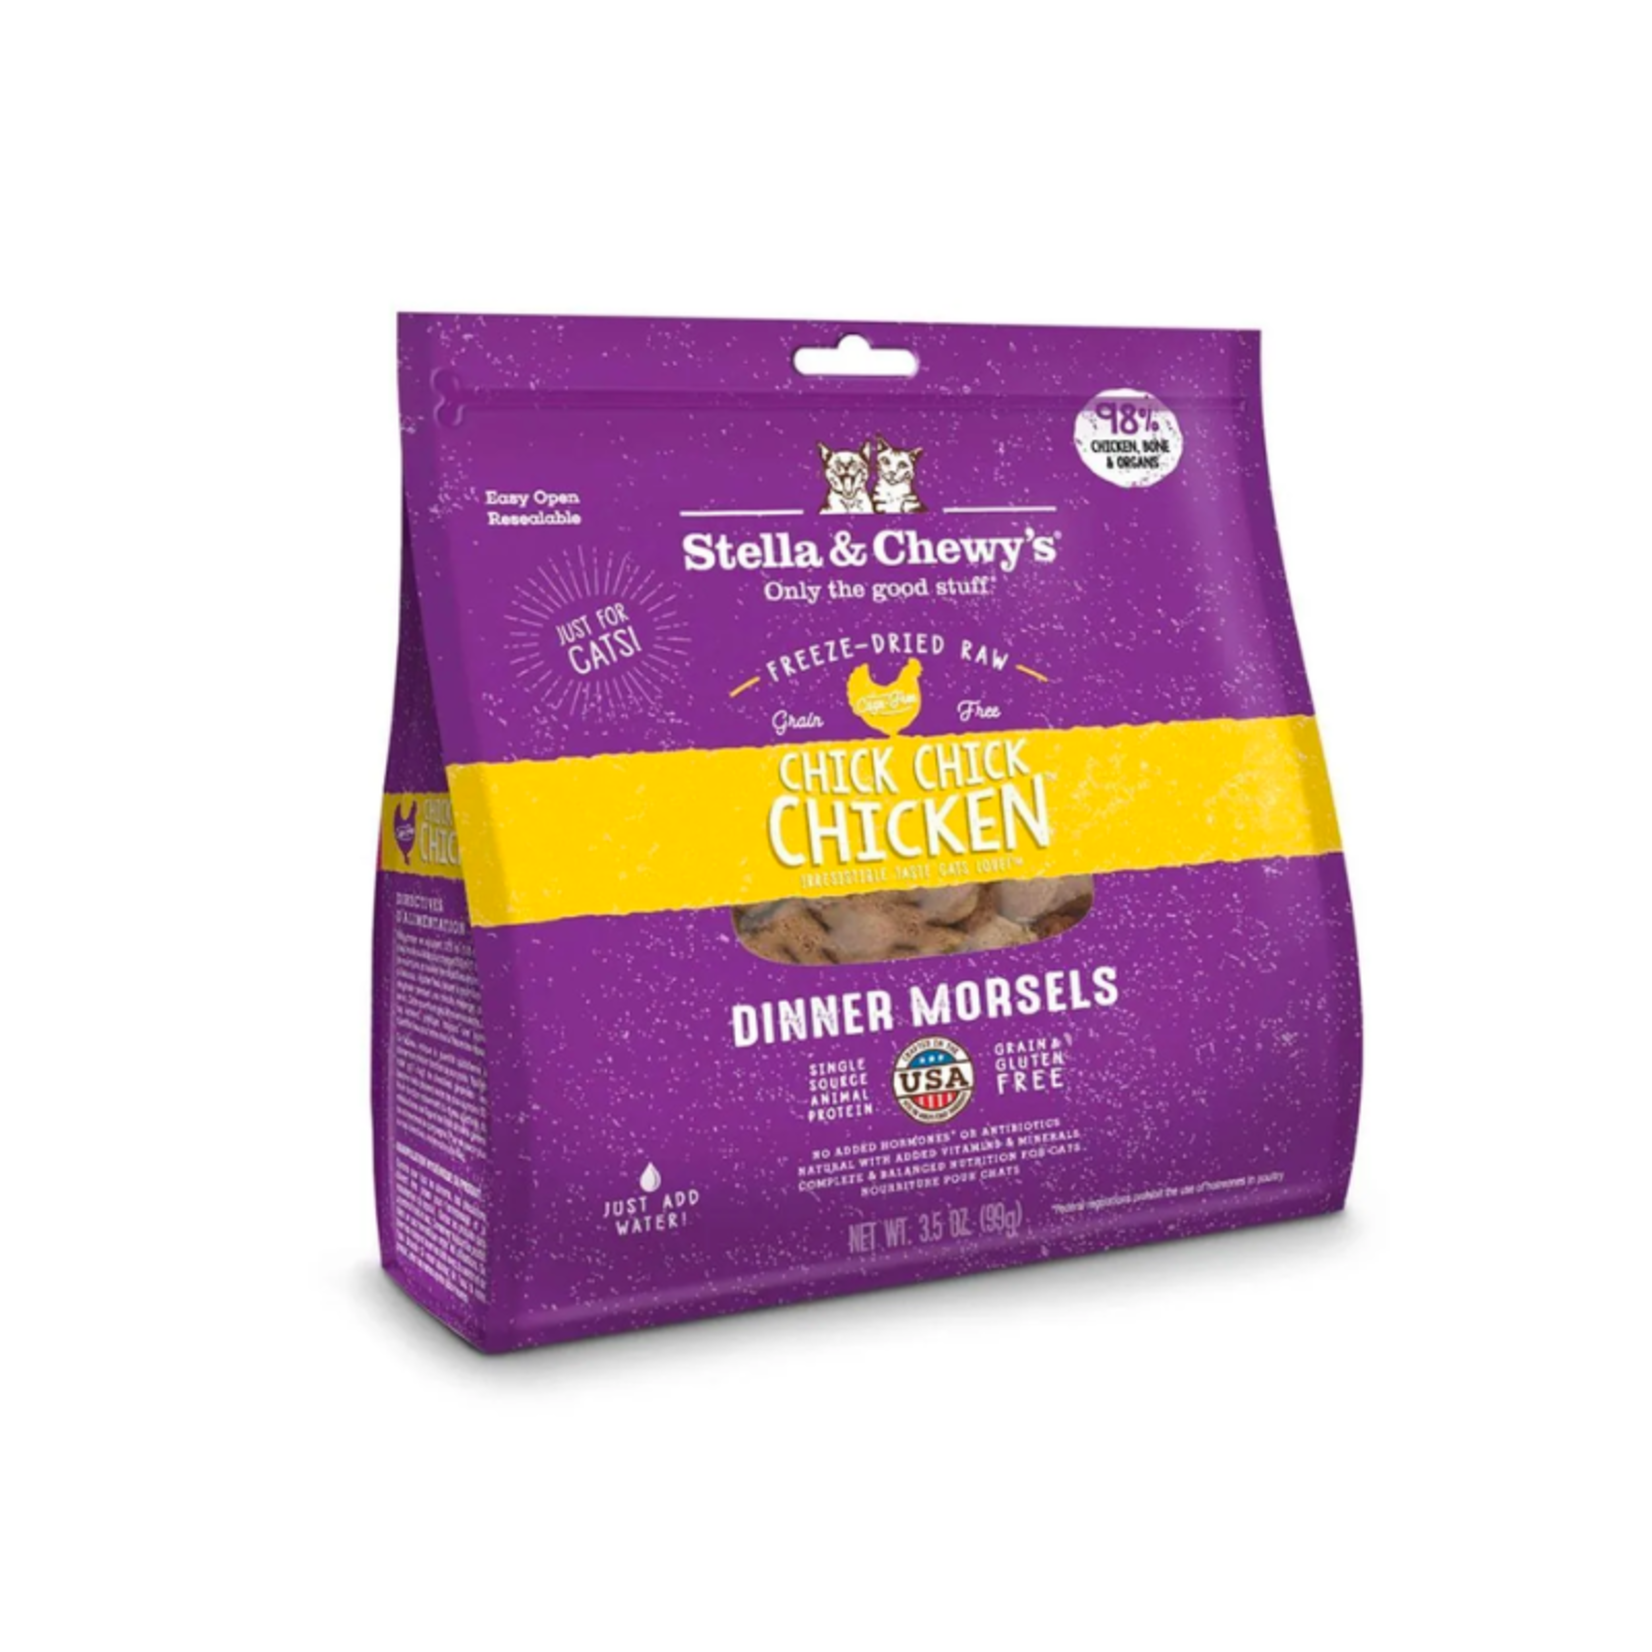 Stella & Chewy's Chick, Chick Chicken Freeze-Dried Raw Dinner Morsels for Cats - Stella & Chewy's